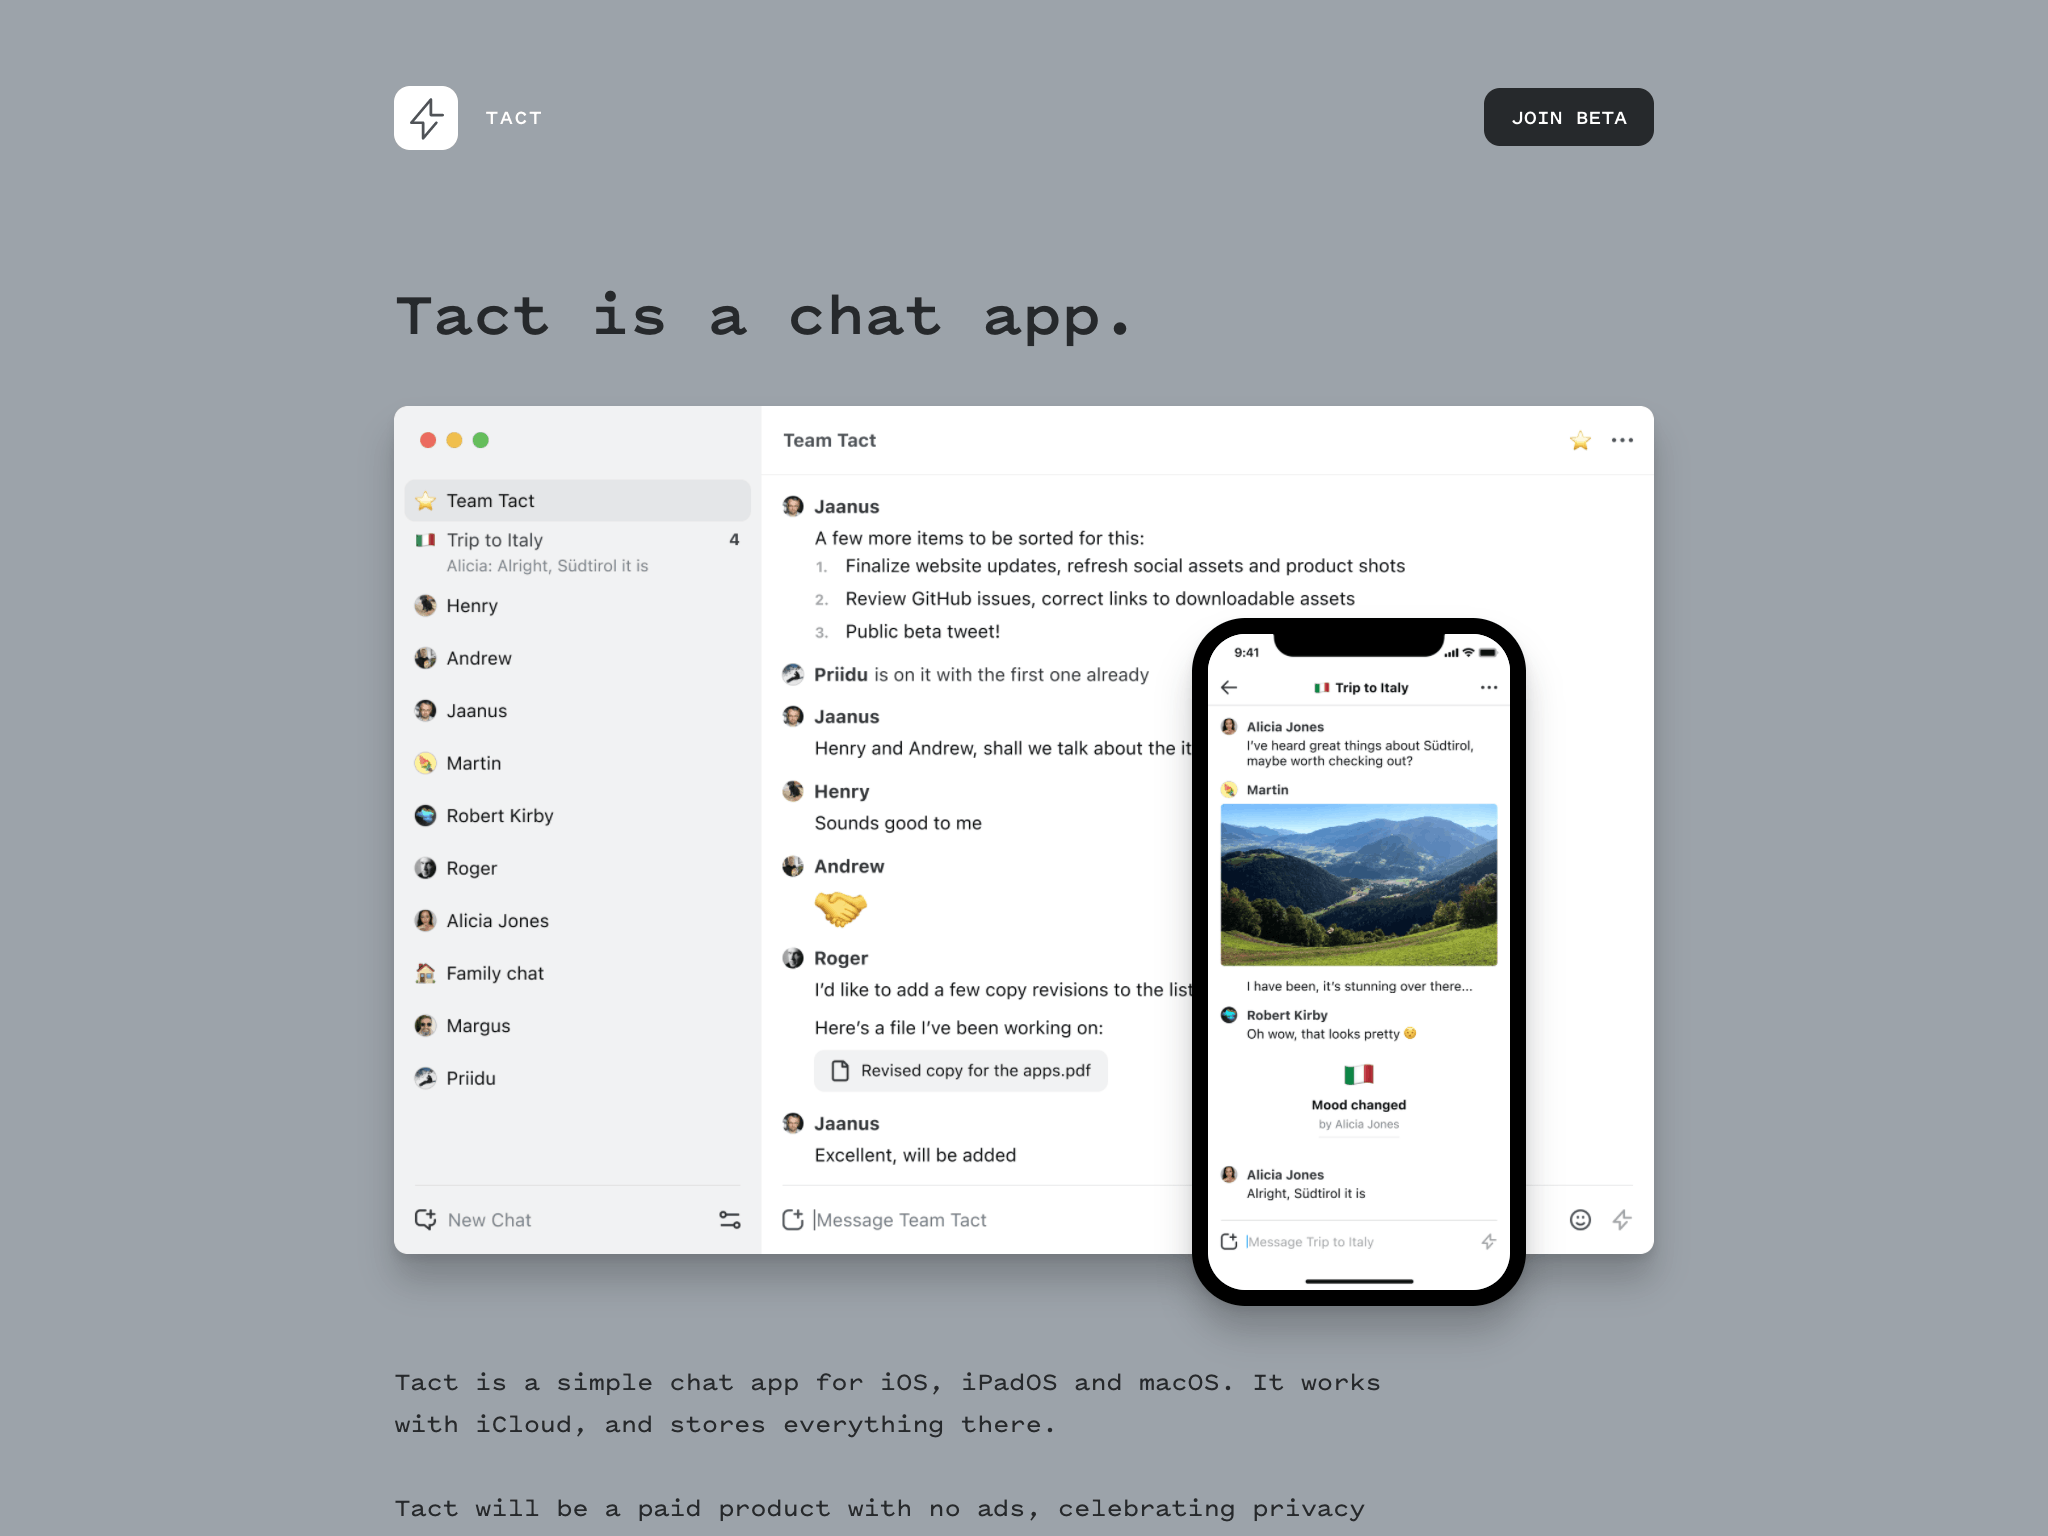 Tact. A simple chat app.